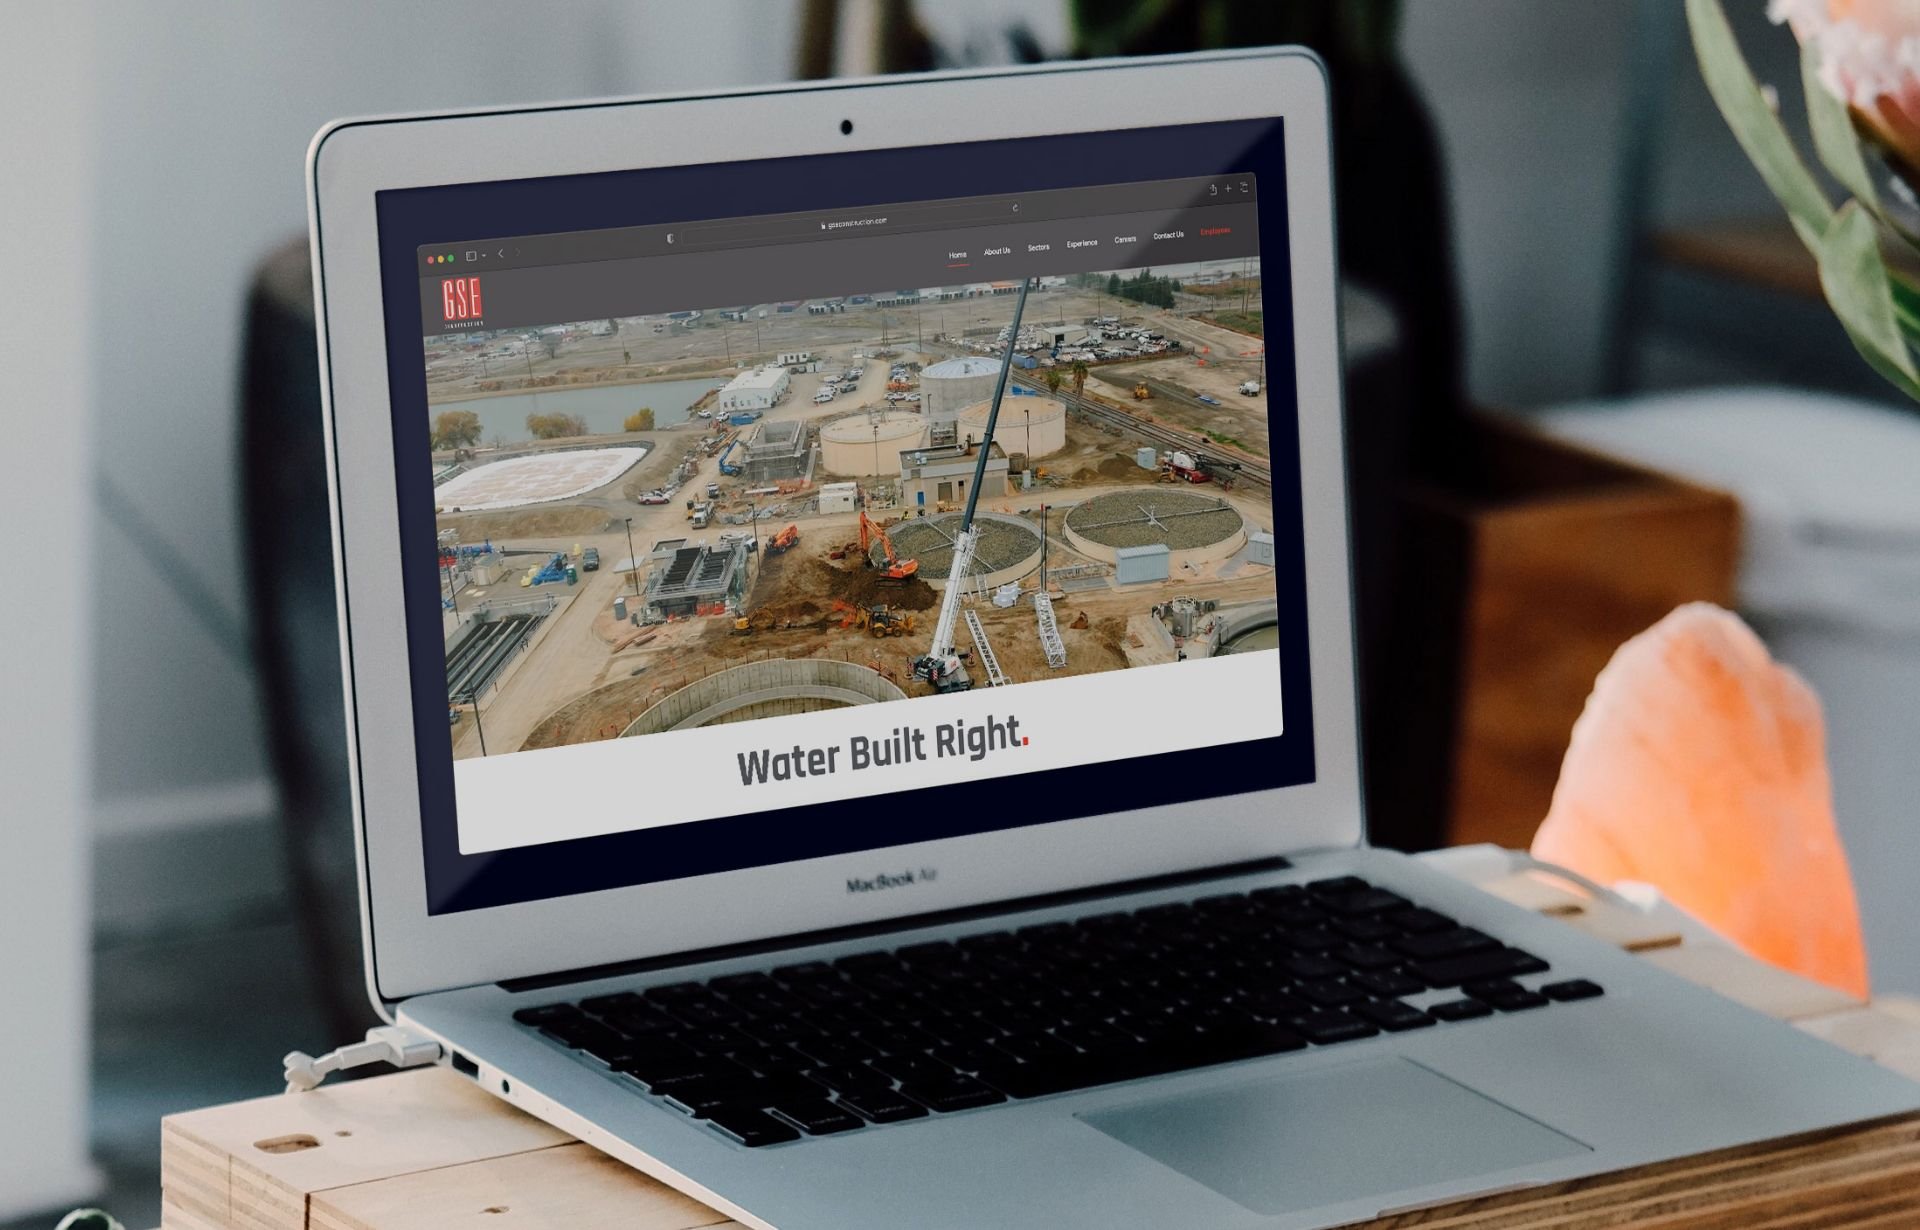 GSE Construction Launches New Website